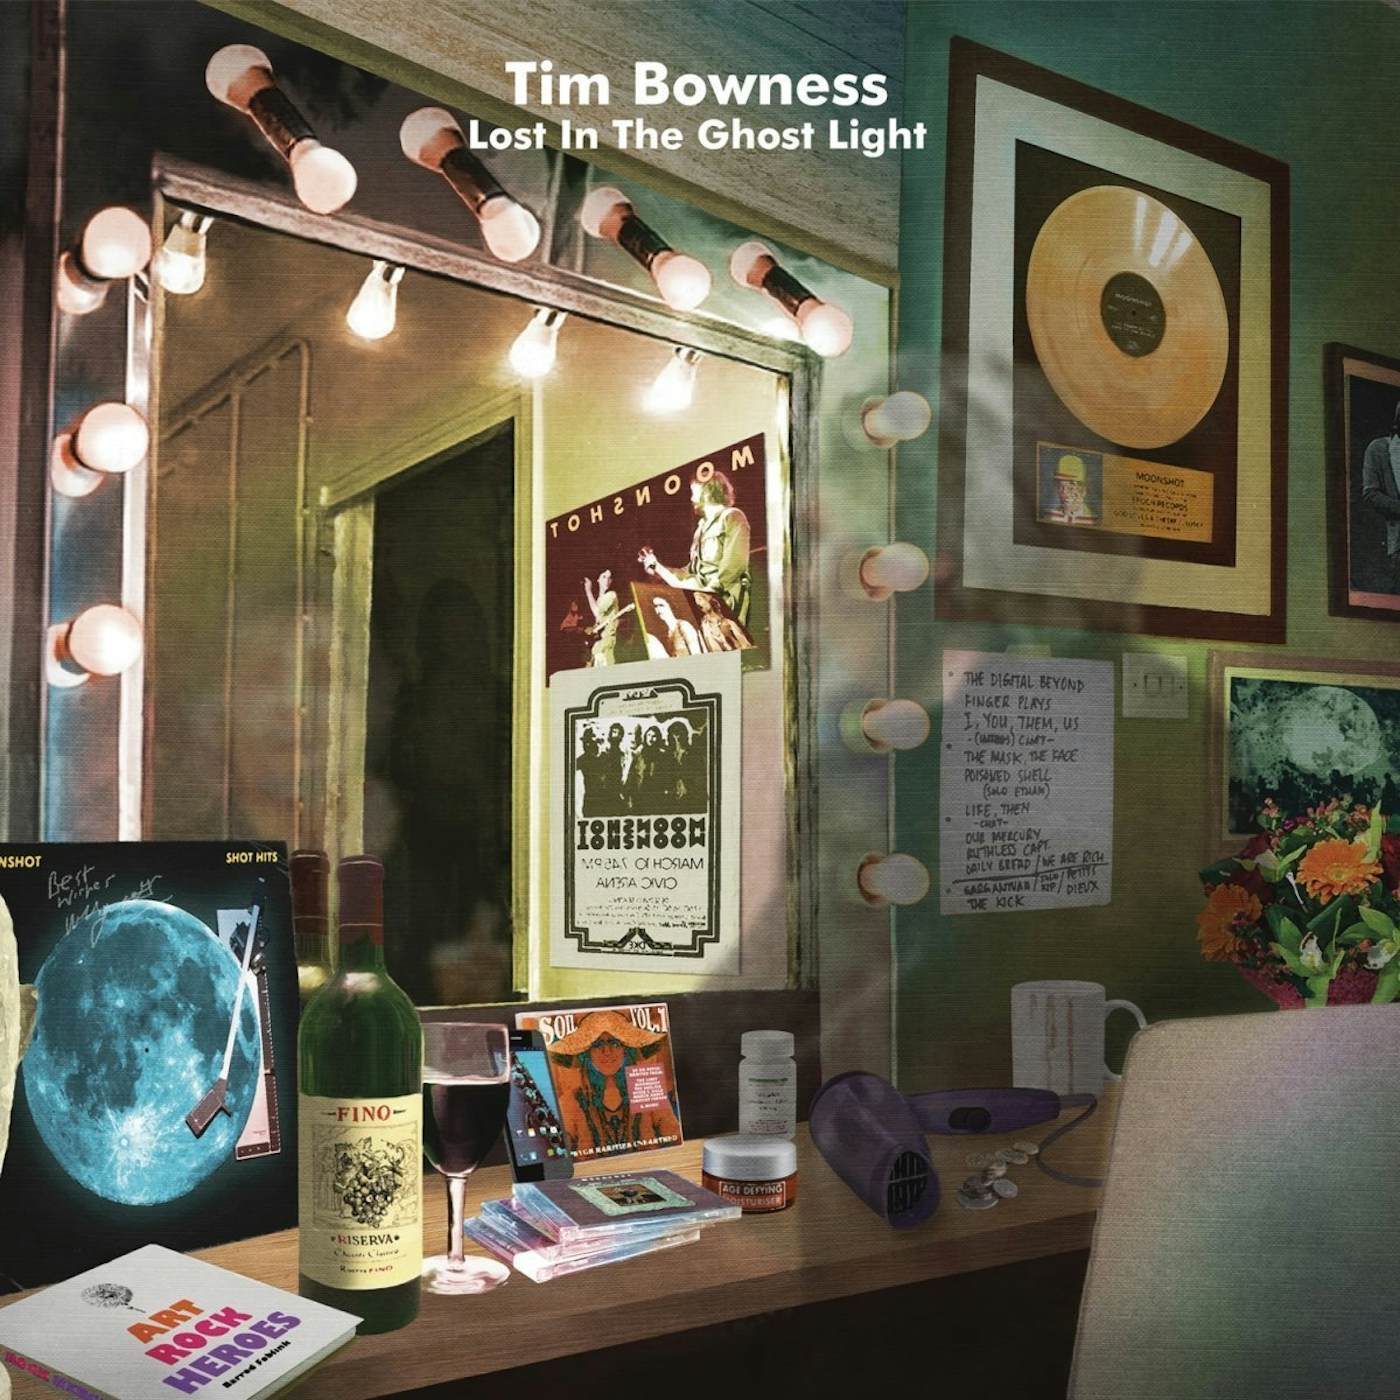 Tim Bowness LOST IN THE GHOST LIGHT CD